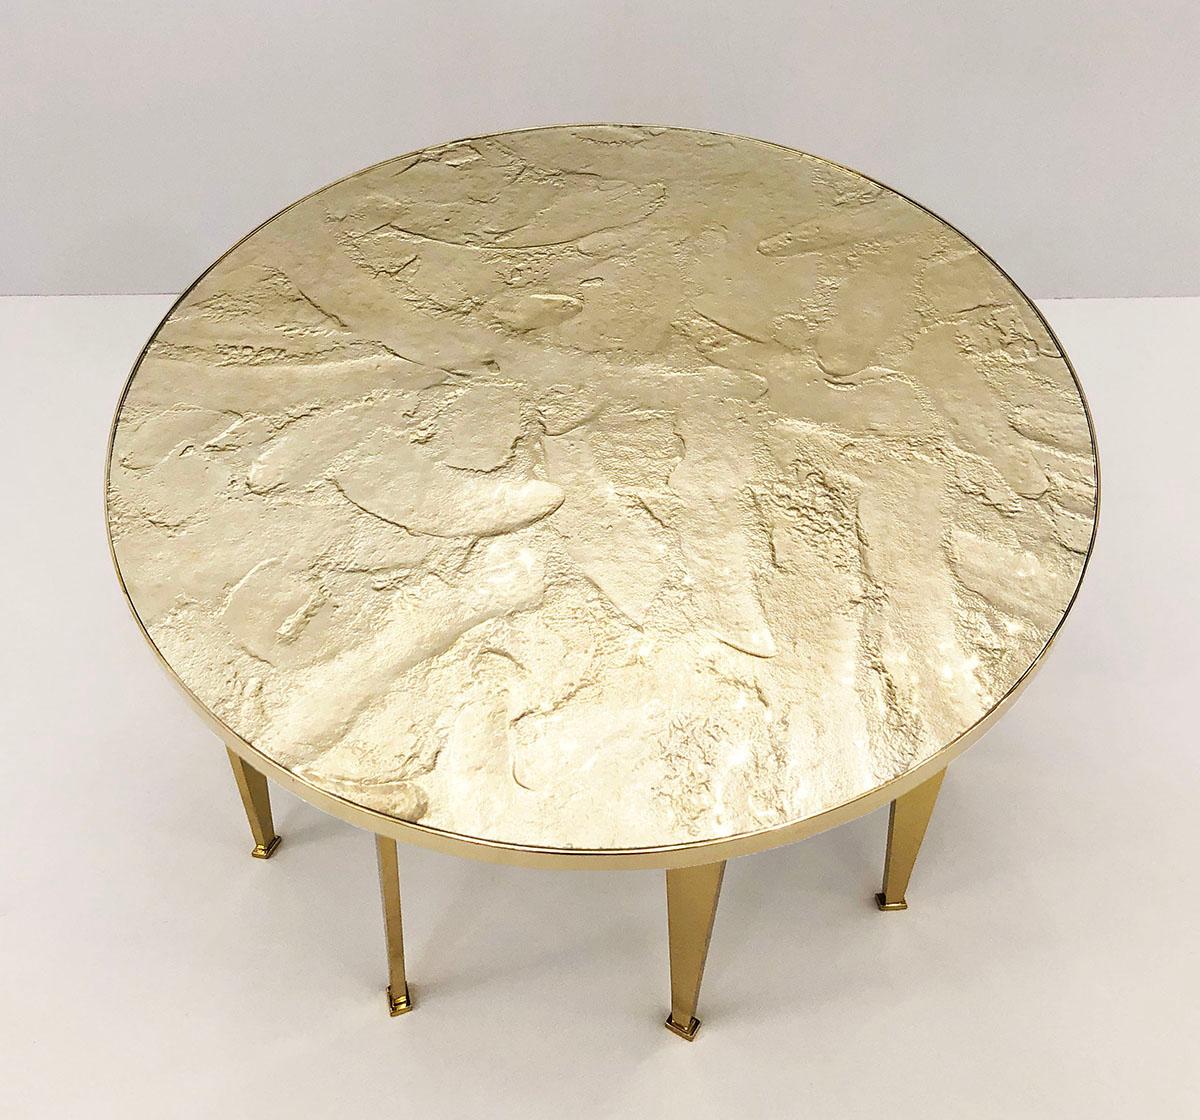 The Fossile table is designed around a handmade glass top textured to emulate fossilized stone and mounted on a brass frame with angled legs. The texturing work is done on the underside of the glass leaving a smooth top surface. Great for use as a